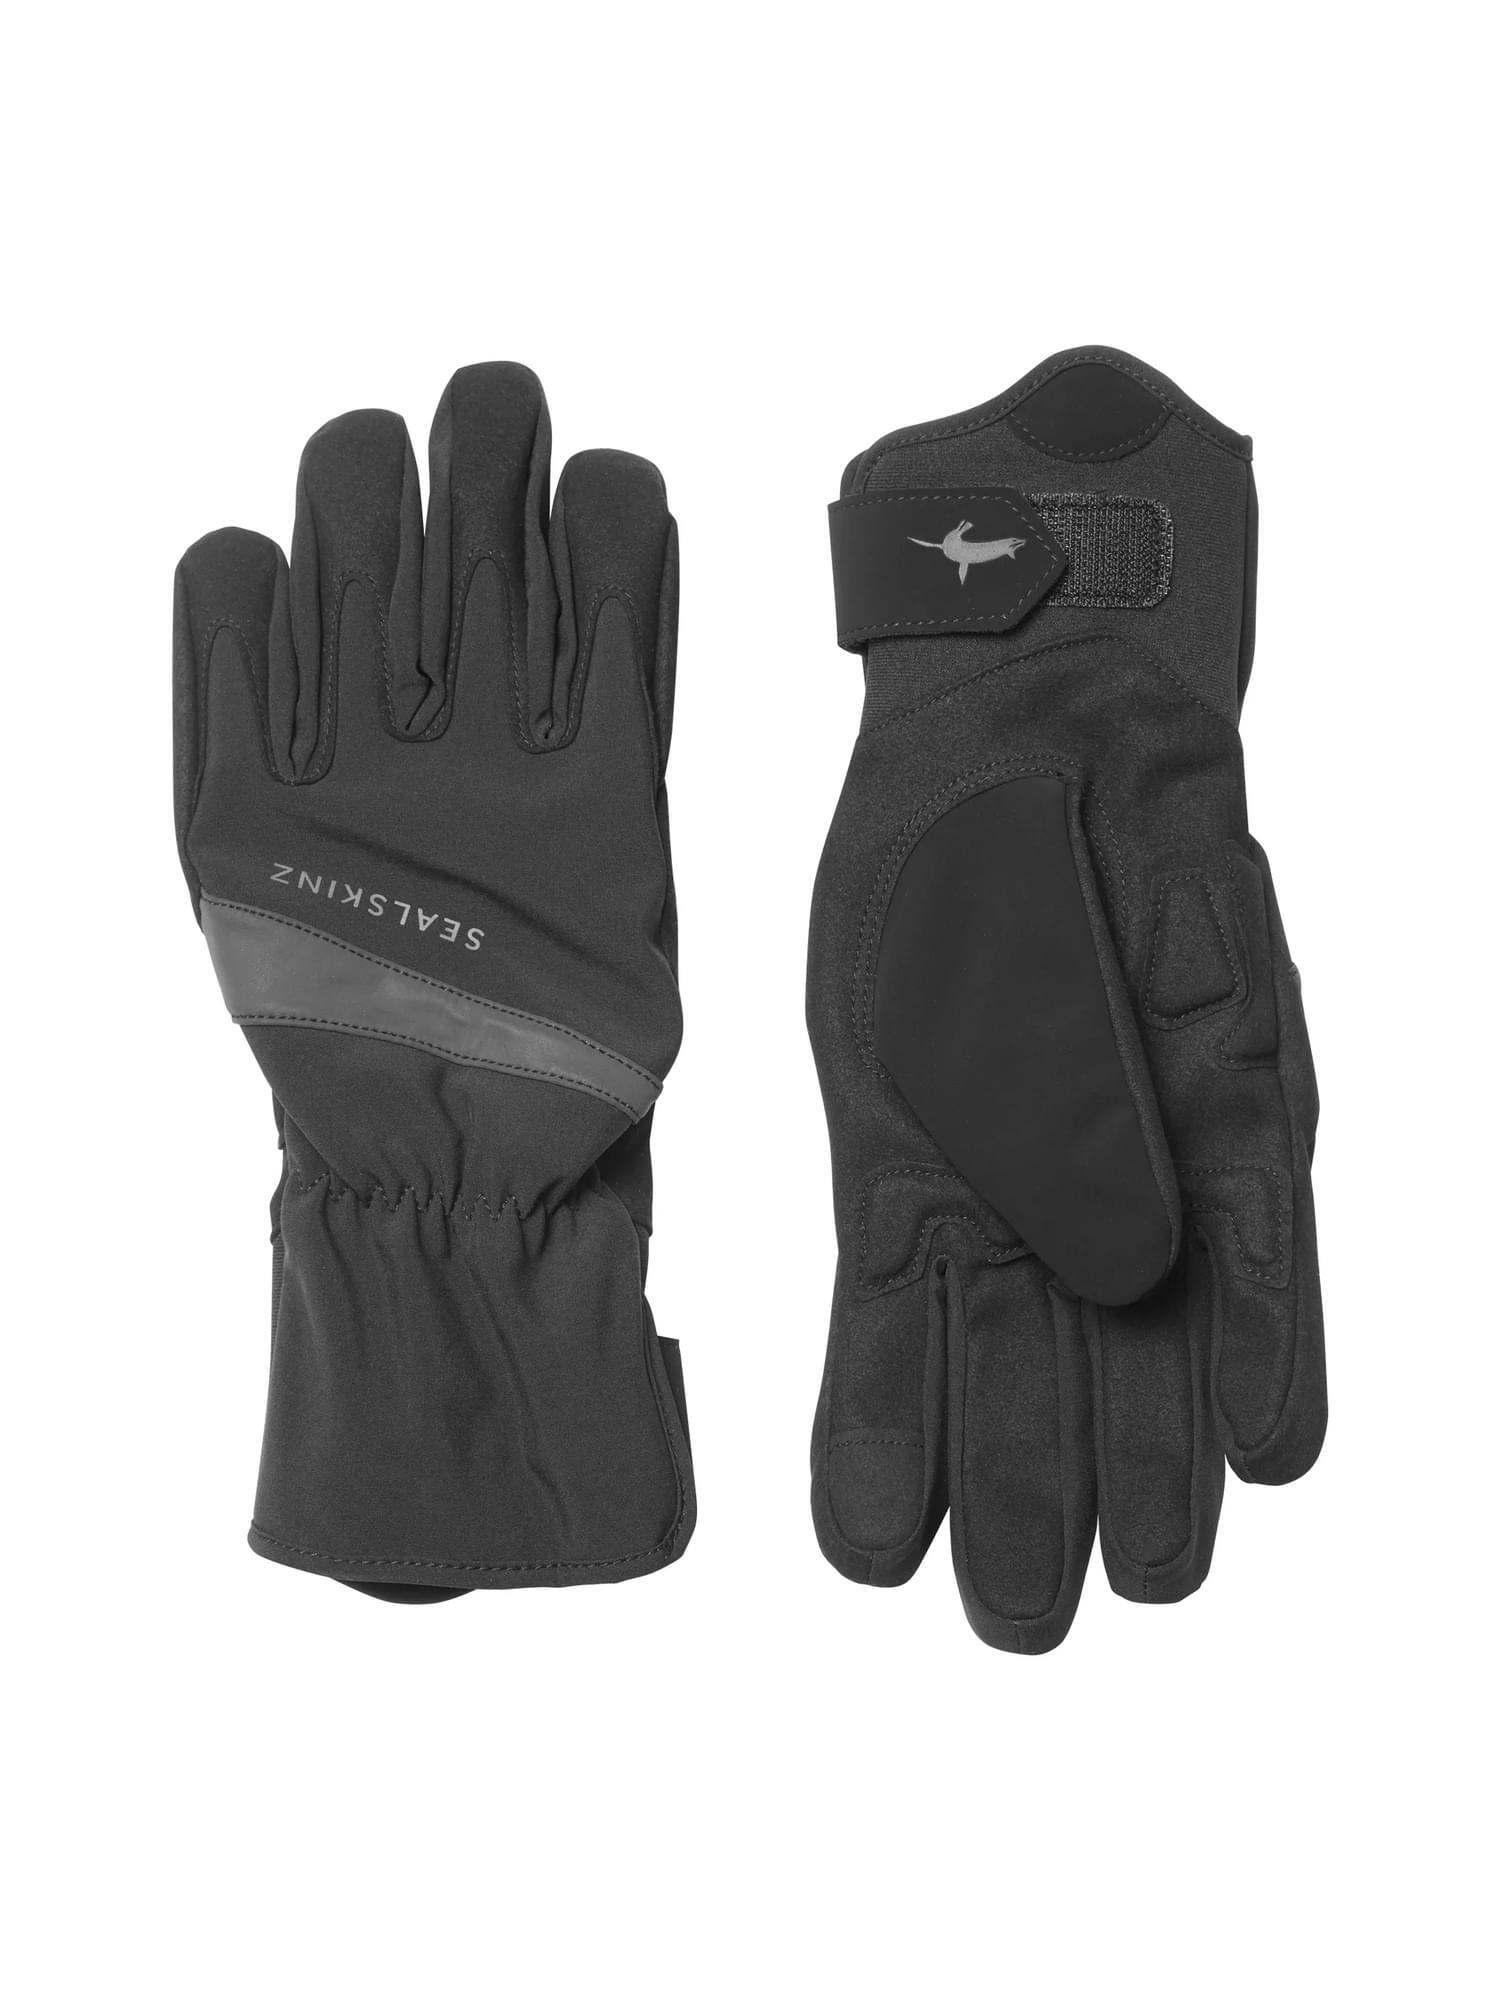 SEALSKINZ Mens Waterproof All Weather Cycle Gloves